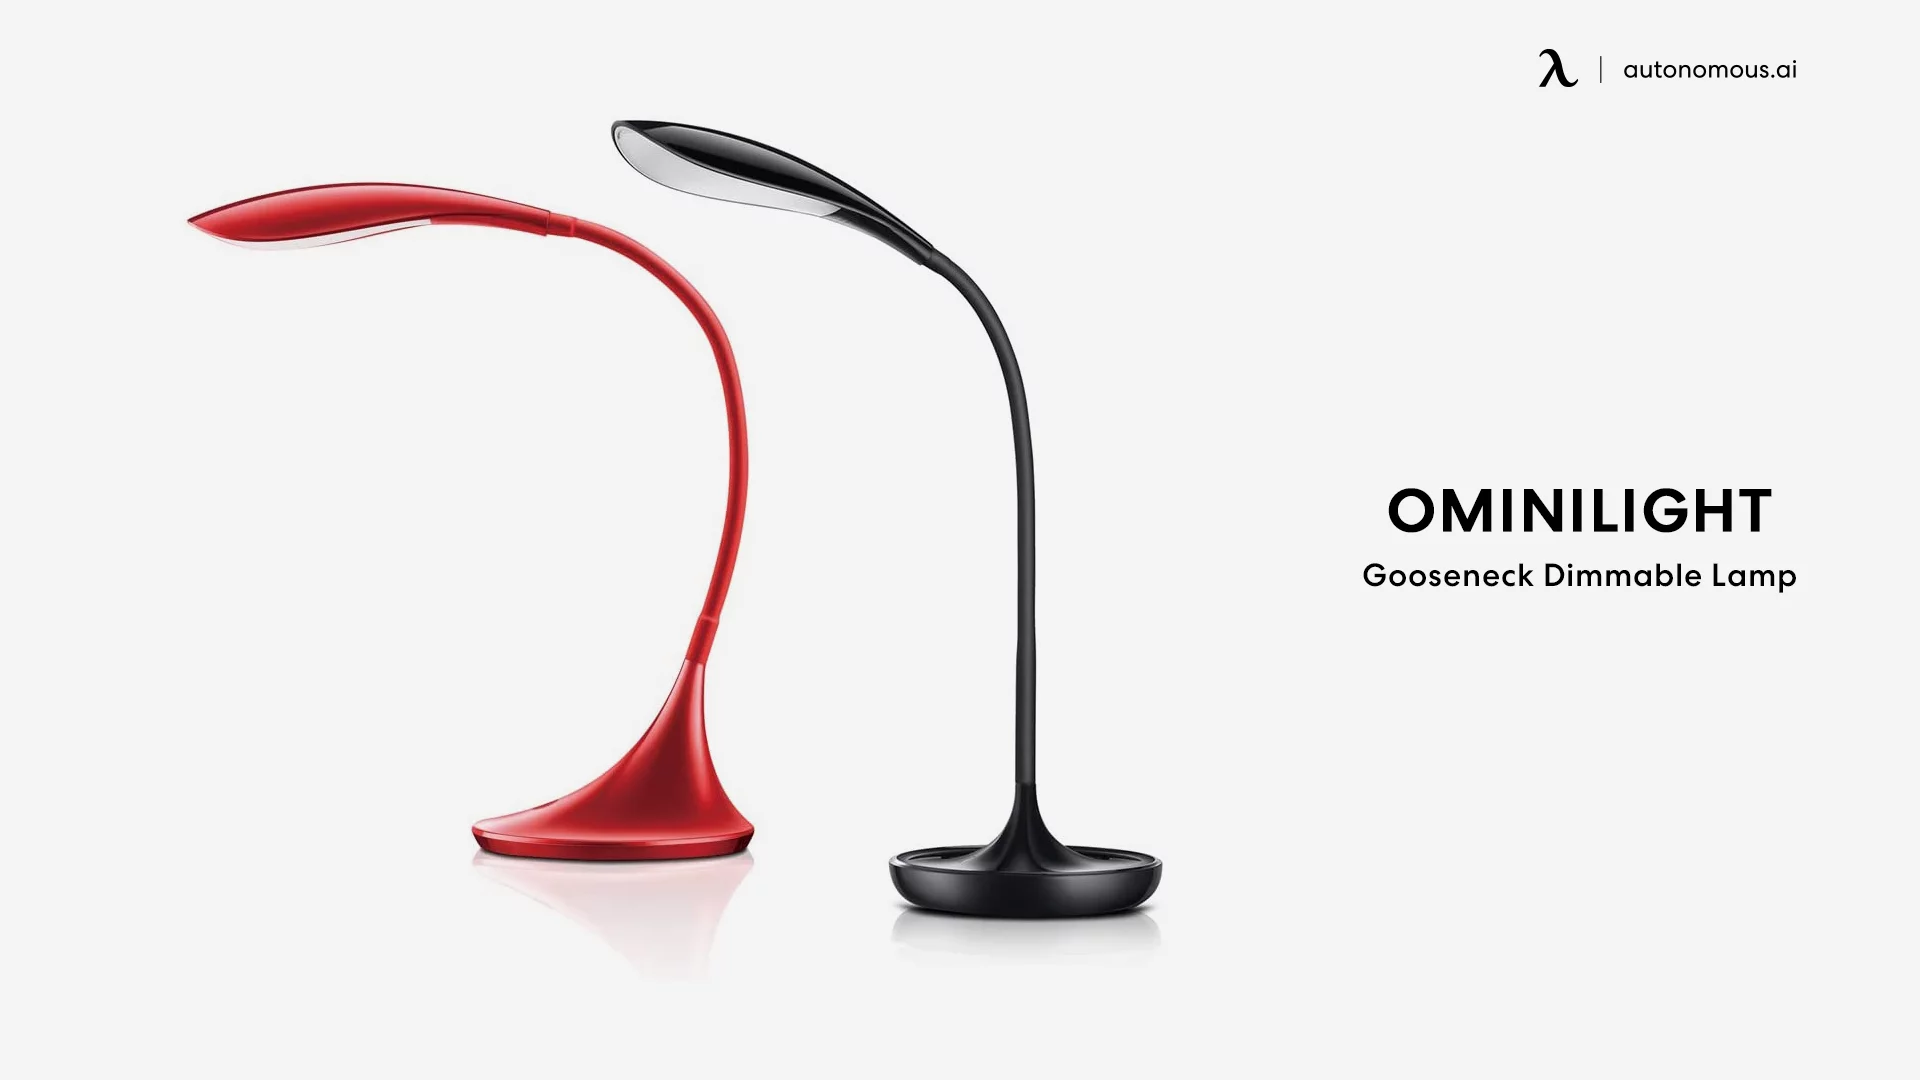 Ominilight Gooseneck Dimmable Lamp